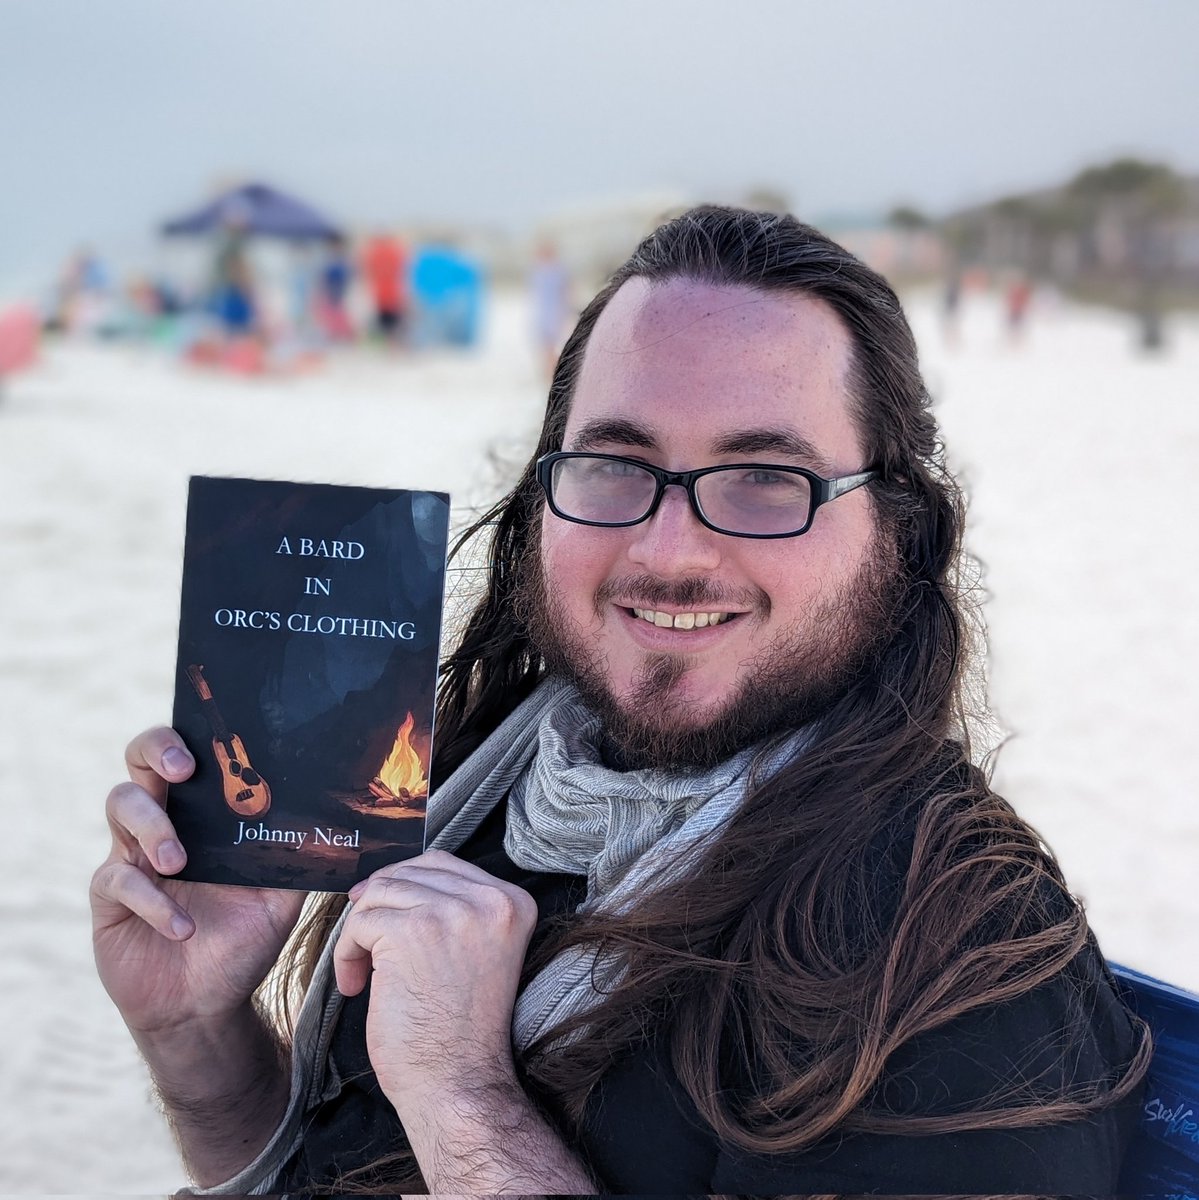 What do you do when the weather conditions are bad every day of your beach vacation and you can't go in the water? Why, read @mrebard's book 'A Bard in Orc's Clothing' of course!